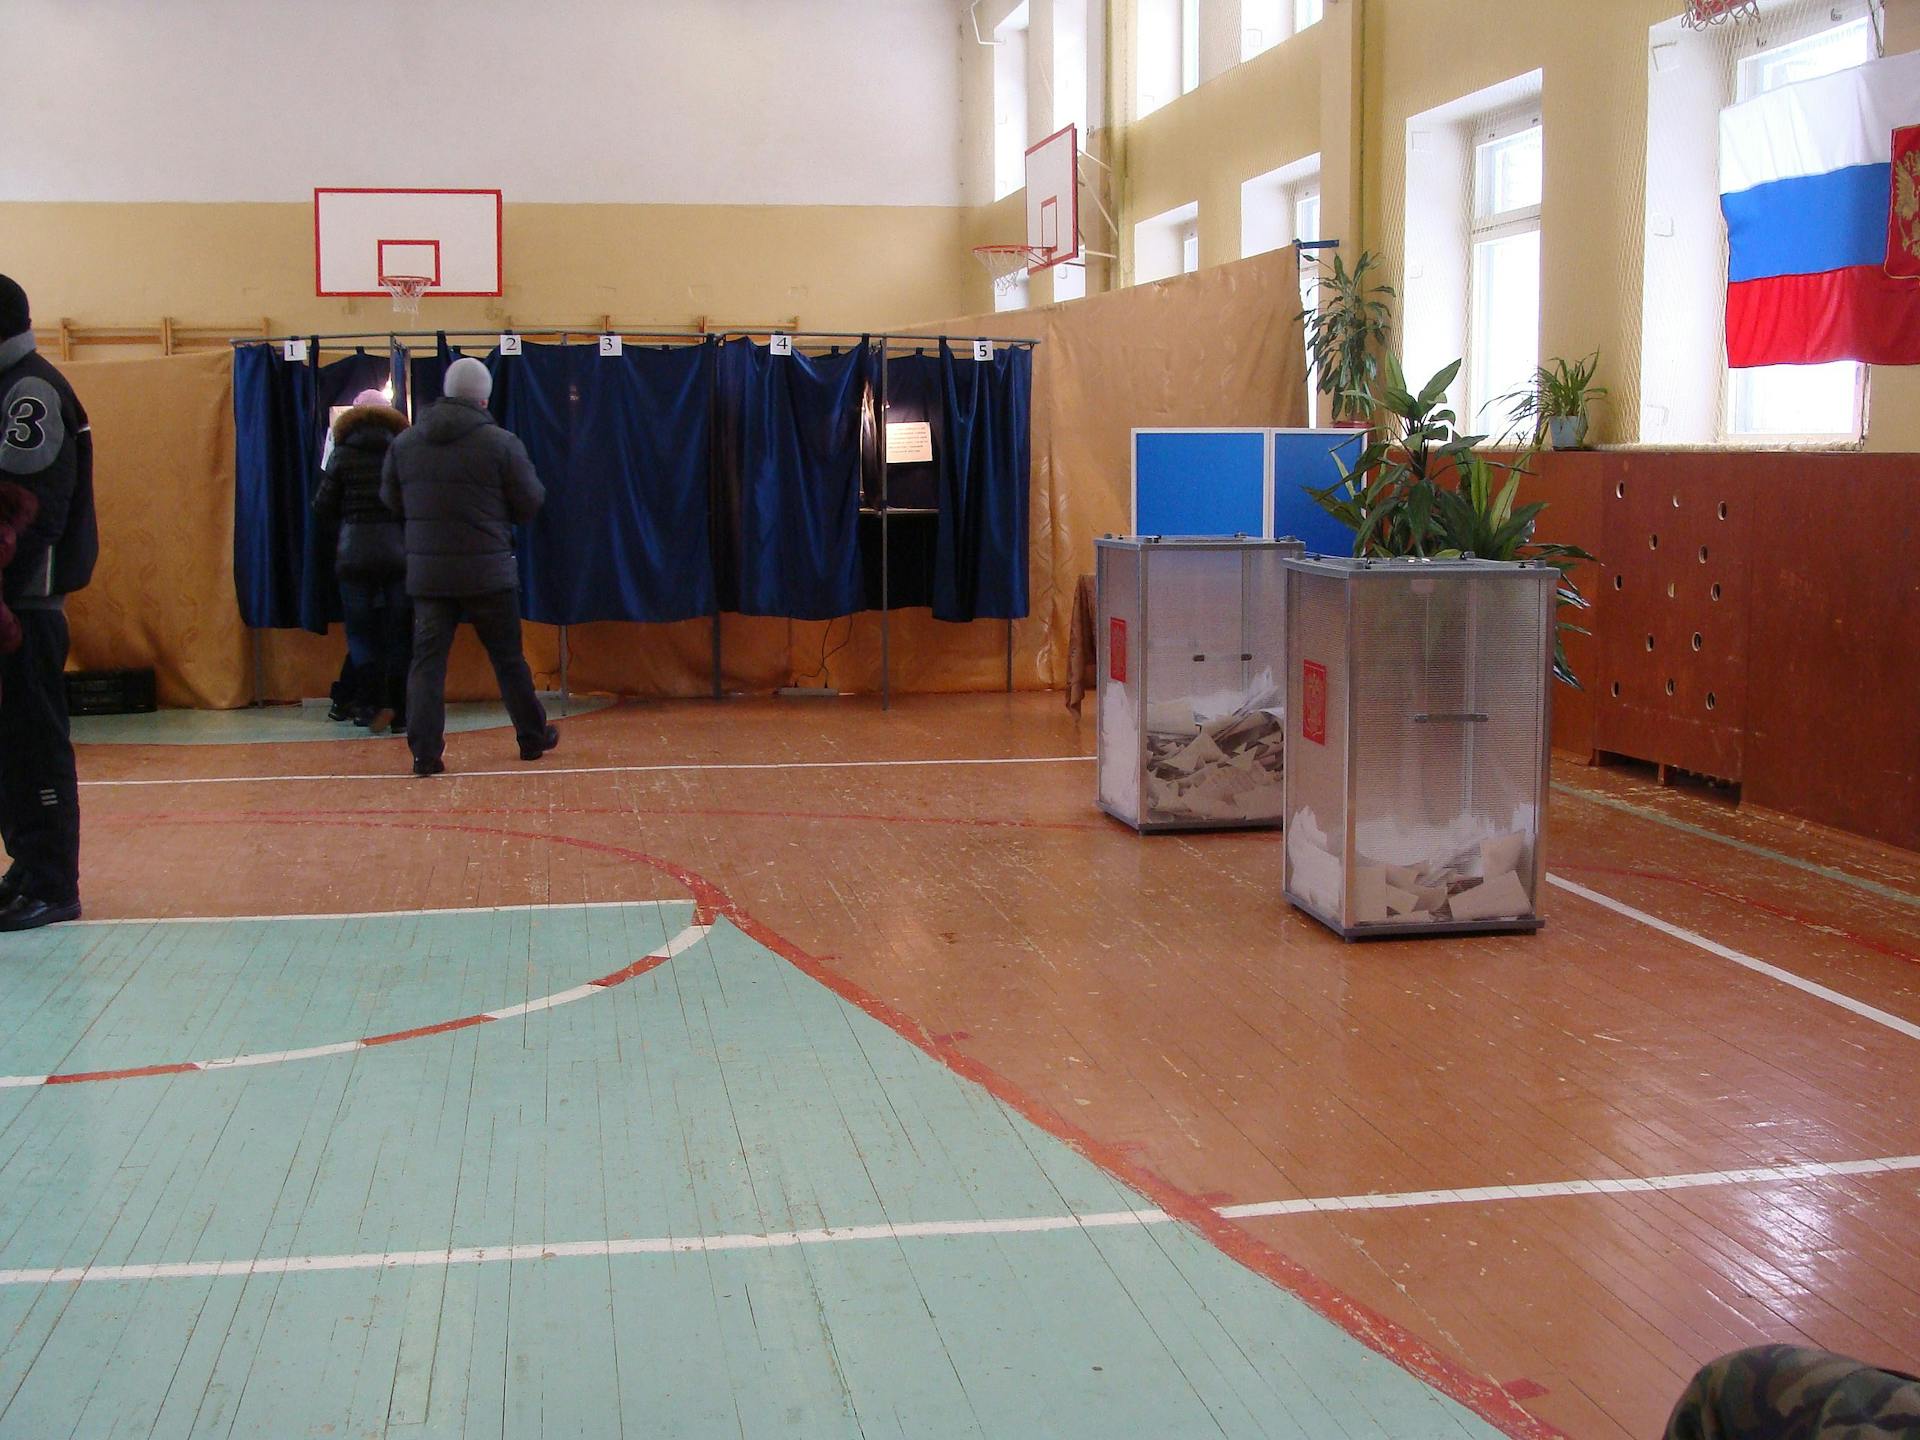 Polling station in a Russian school